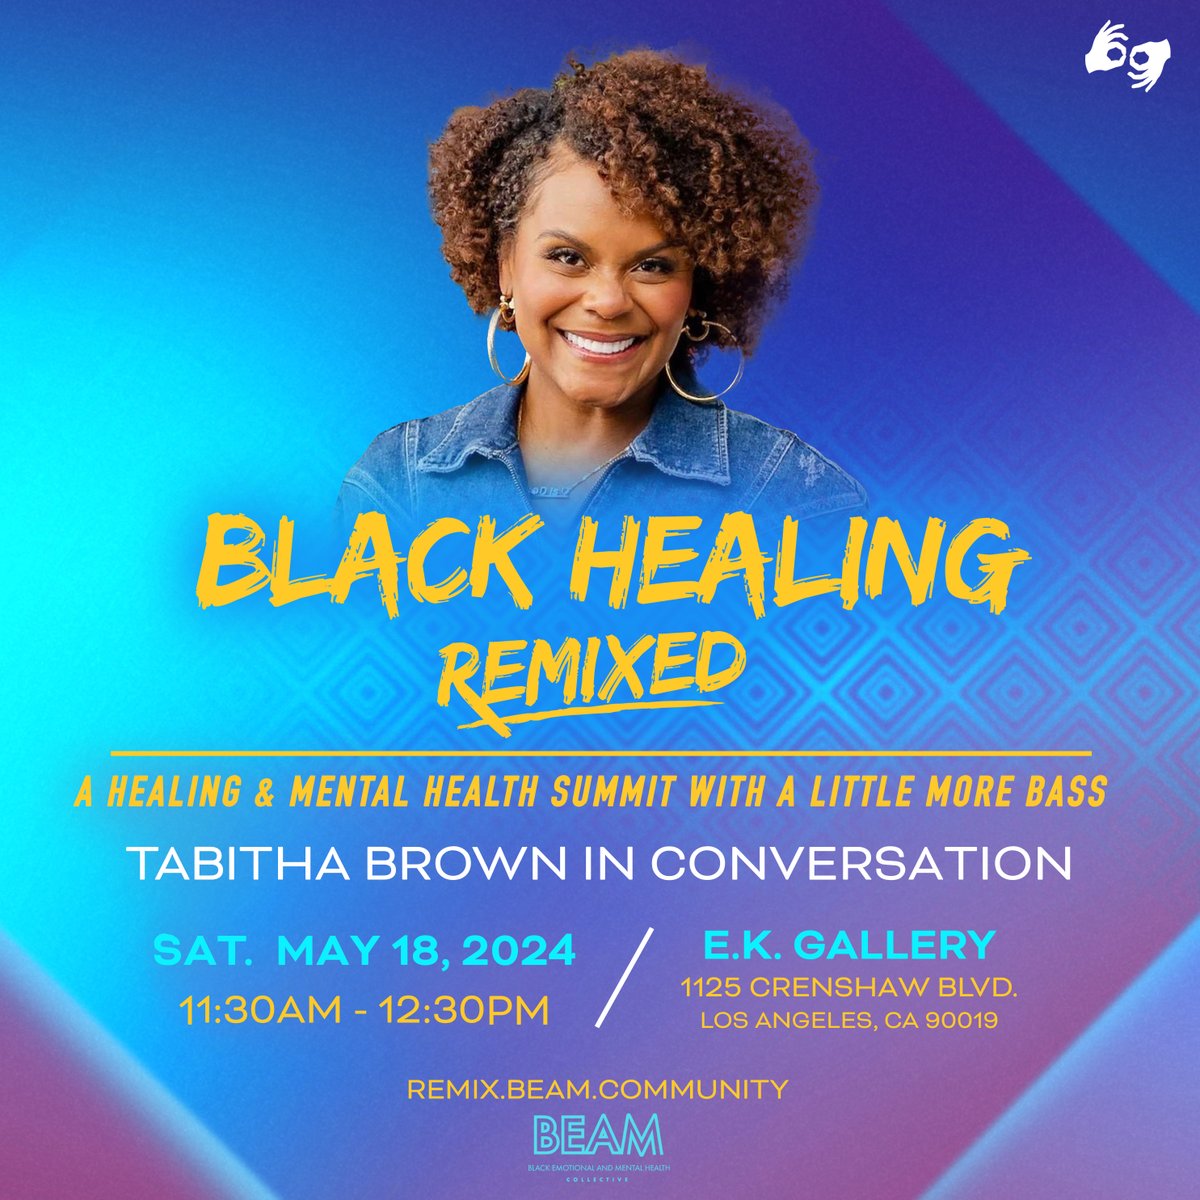 We are extremely excited to announce our first guest speaker… America’s favorite auntie…TABITHA BROWN, Y’ALL!! Tabitha is an esteemed actress, social media personality and all round entrepreneur who uses humor, positivity and relatability to connect with the world 💜